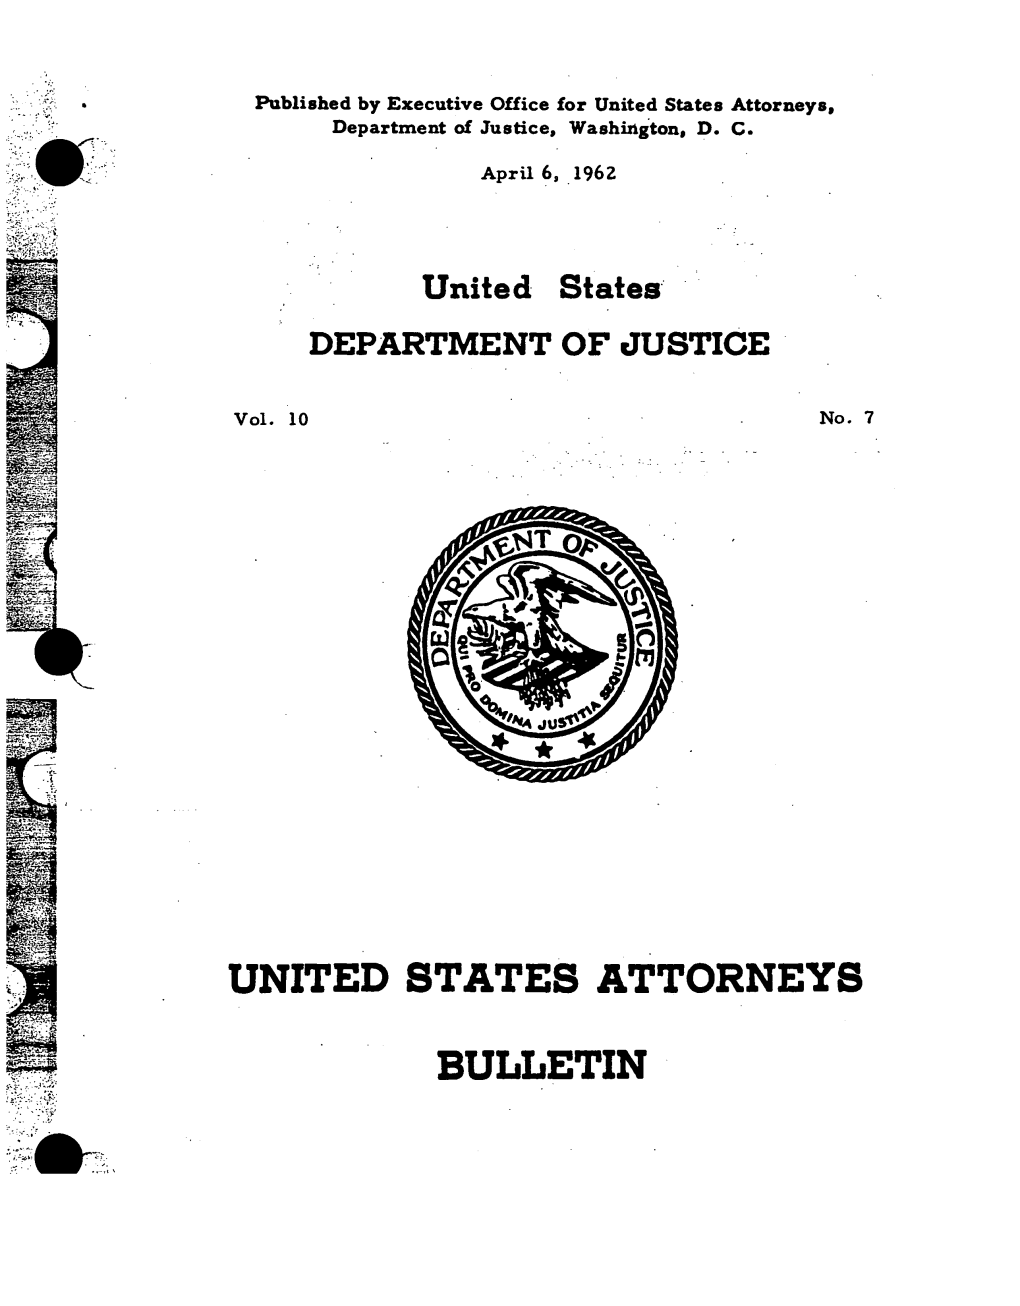 United States Attorneys Department of Justice Washington